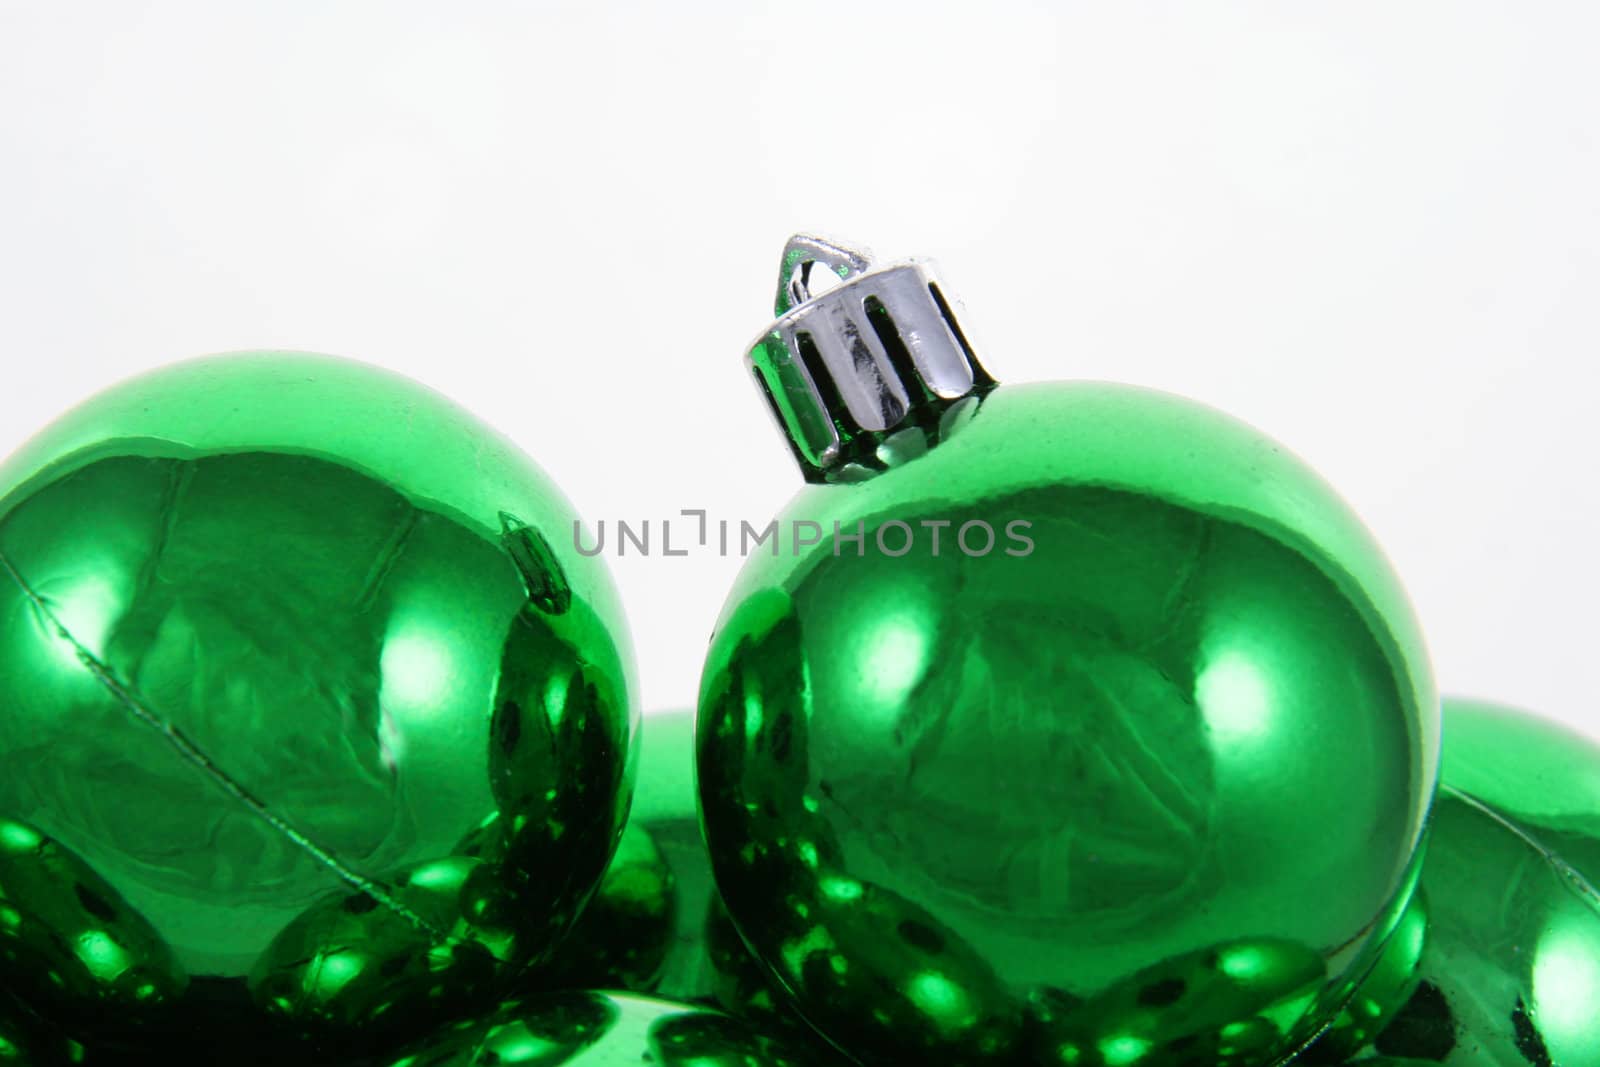 Shiny Green Baubles
 by ca2hill